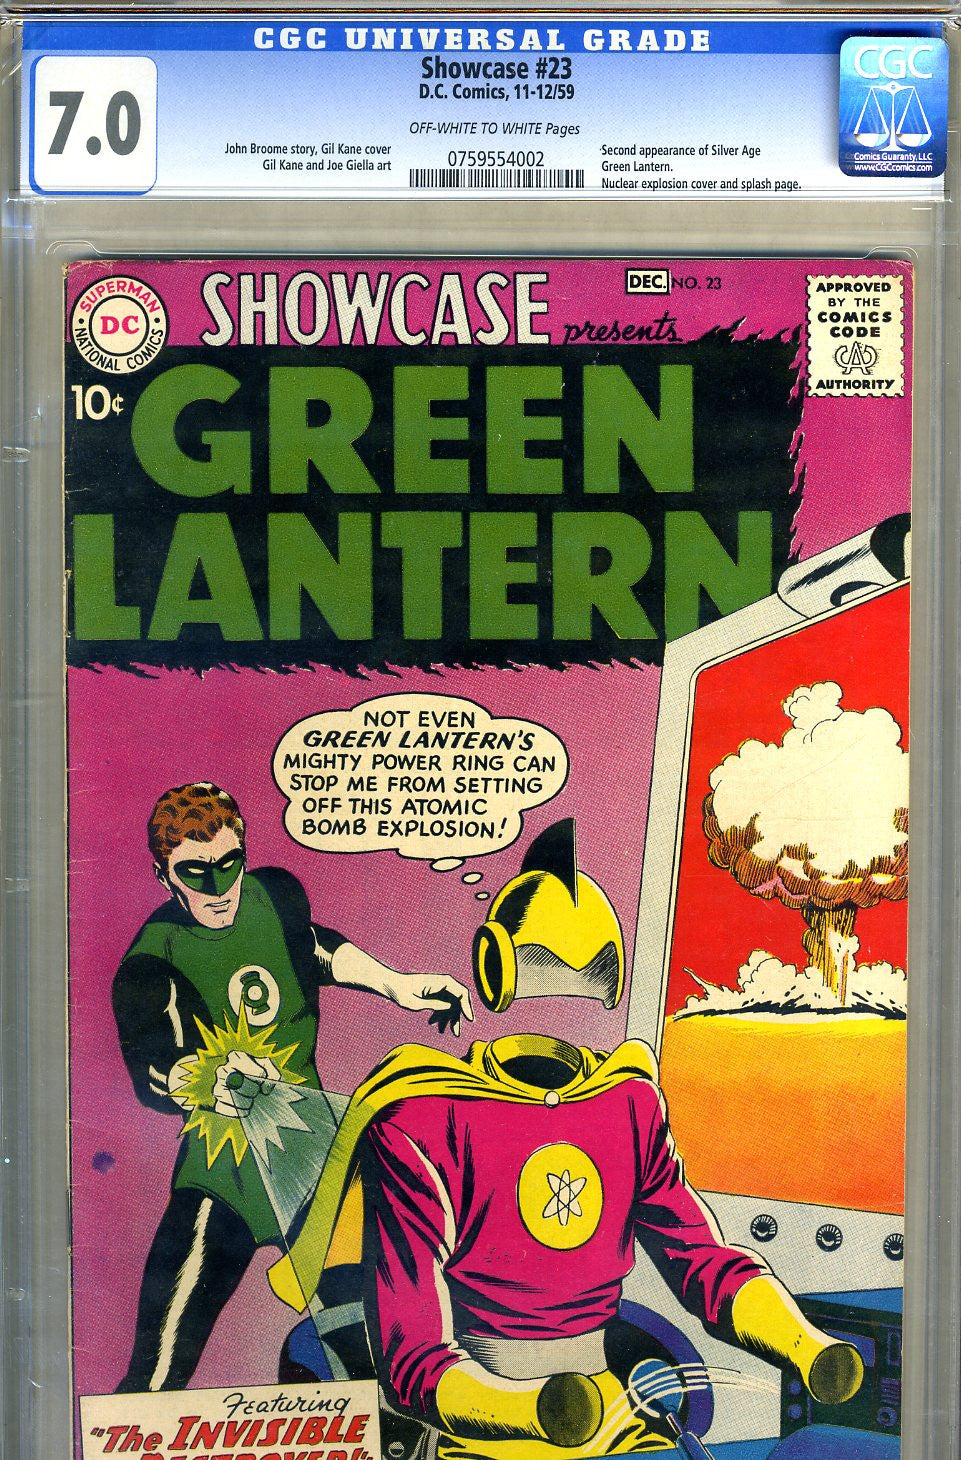 Heritage Sale Features Iconic Green Lantern Comics Certified by CGC